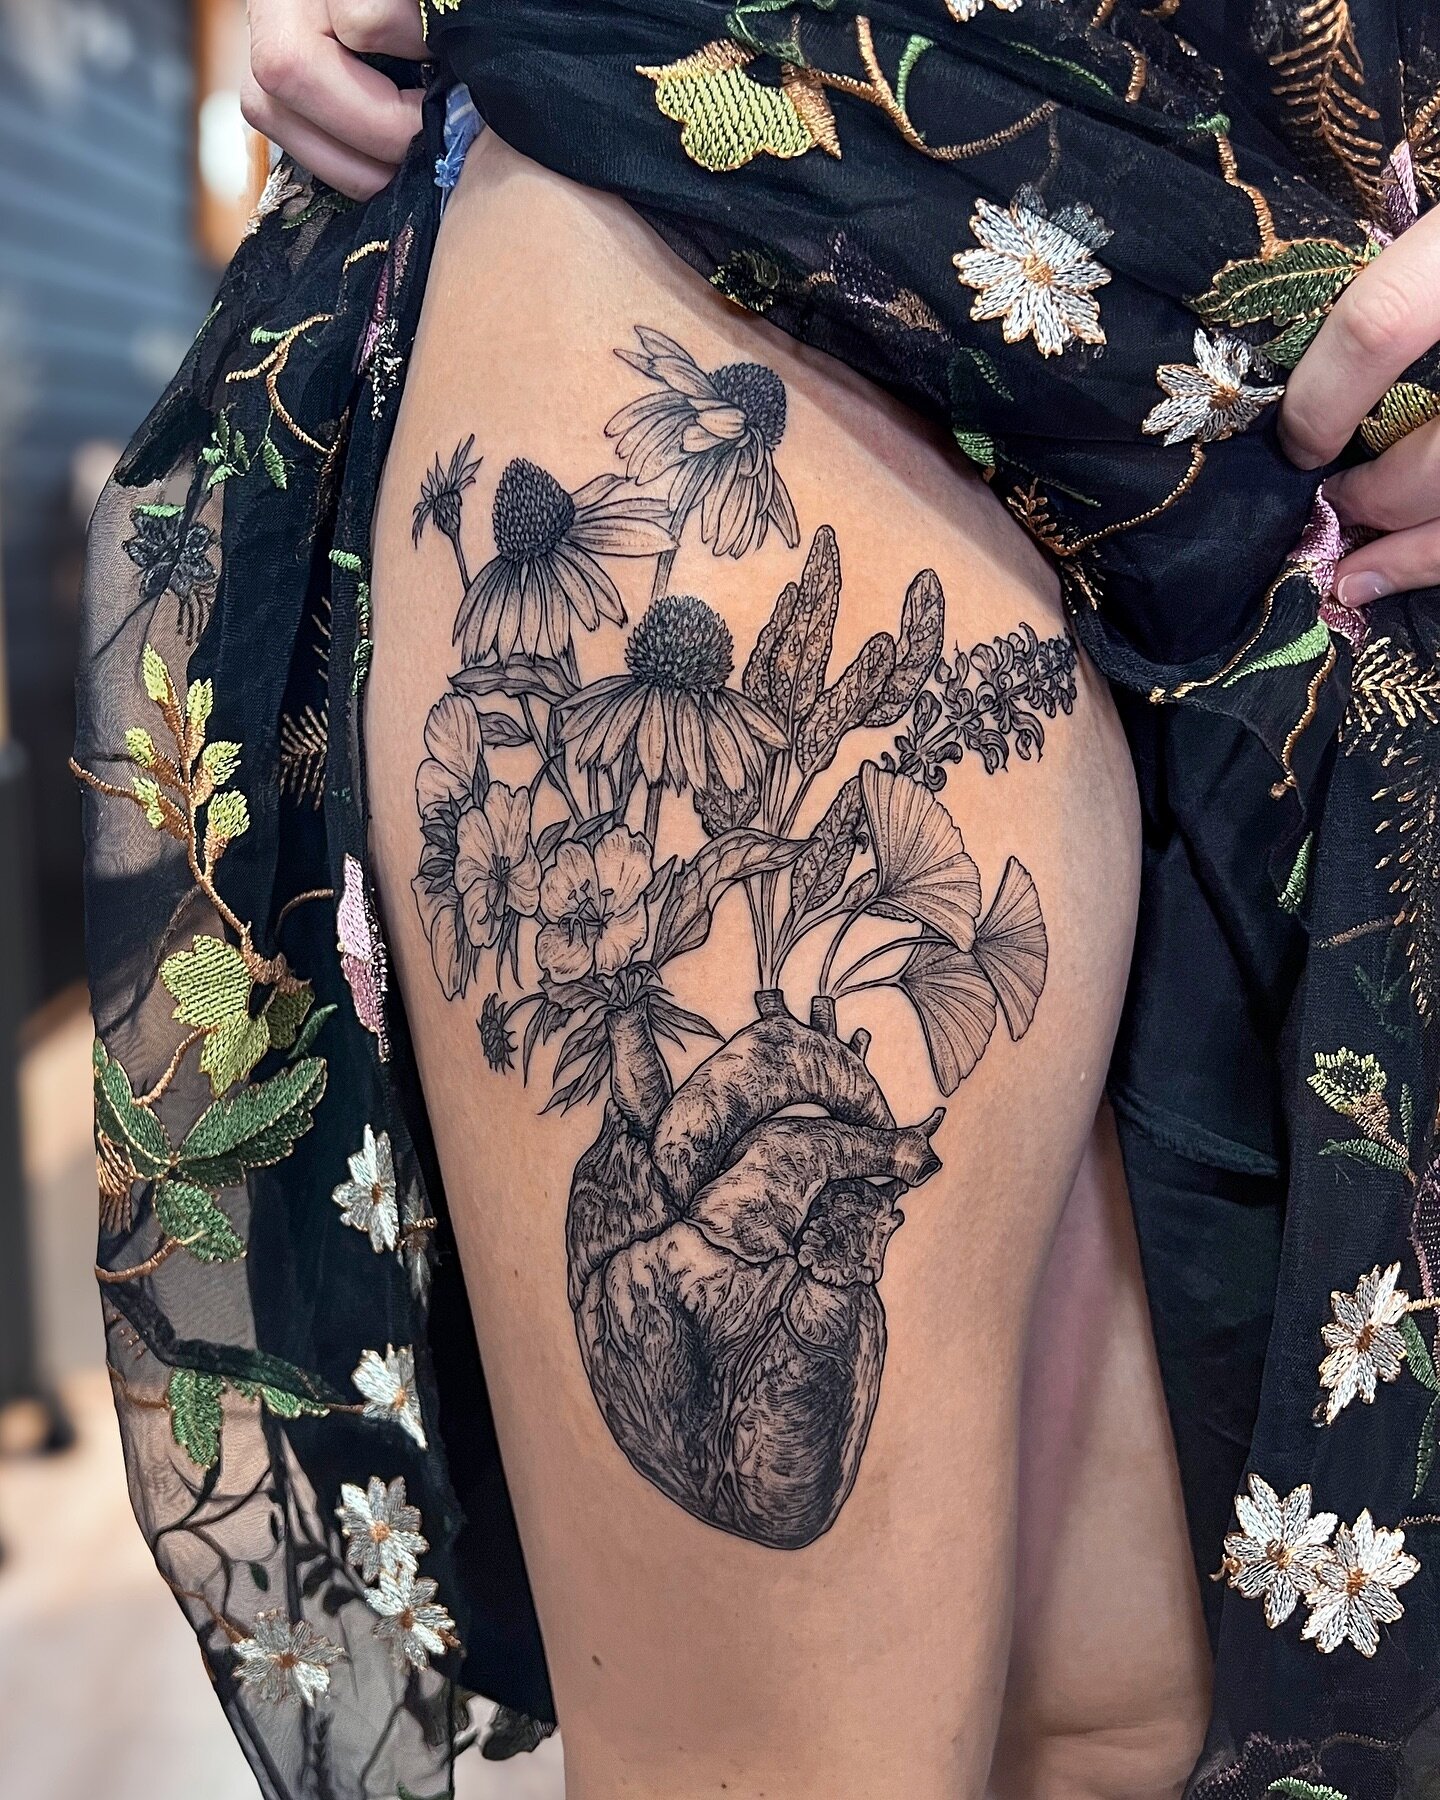 Anatomical heart for K; sage, ginkgo, primrose and echinacea ✨🖤 Thanks so much!